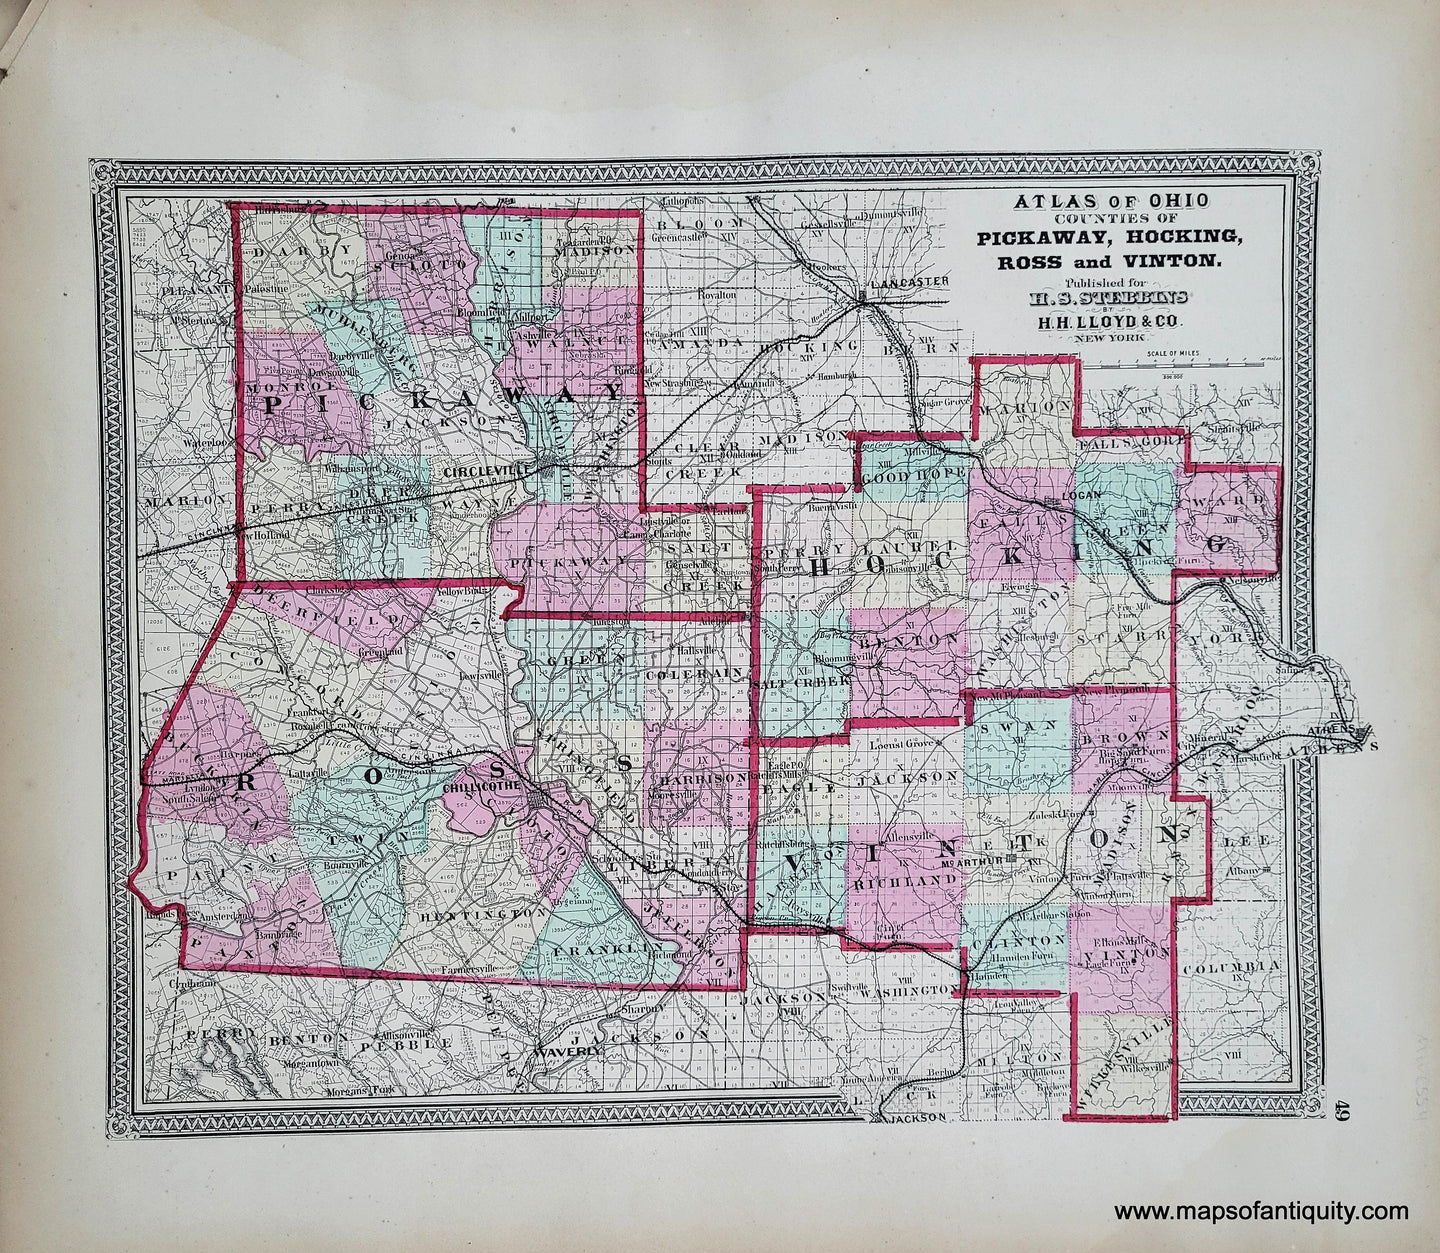 Genuine-Antique-Hand-colored-Map-Atlas-of-Ohio-Counties-of-Pickaway-Hocking-Ross-and-Vinton-1868-Stebbins-Lloyd-Maps-Of-Antiquity